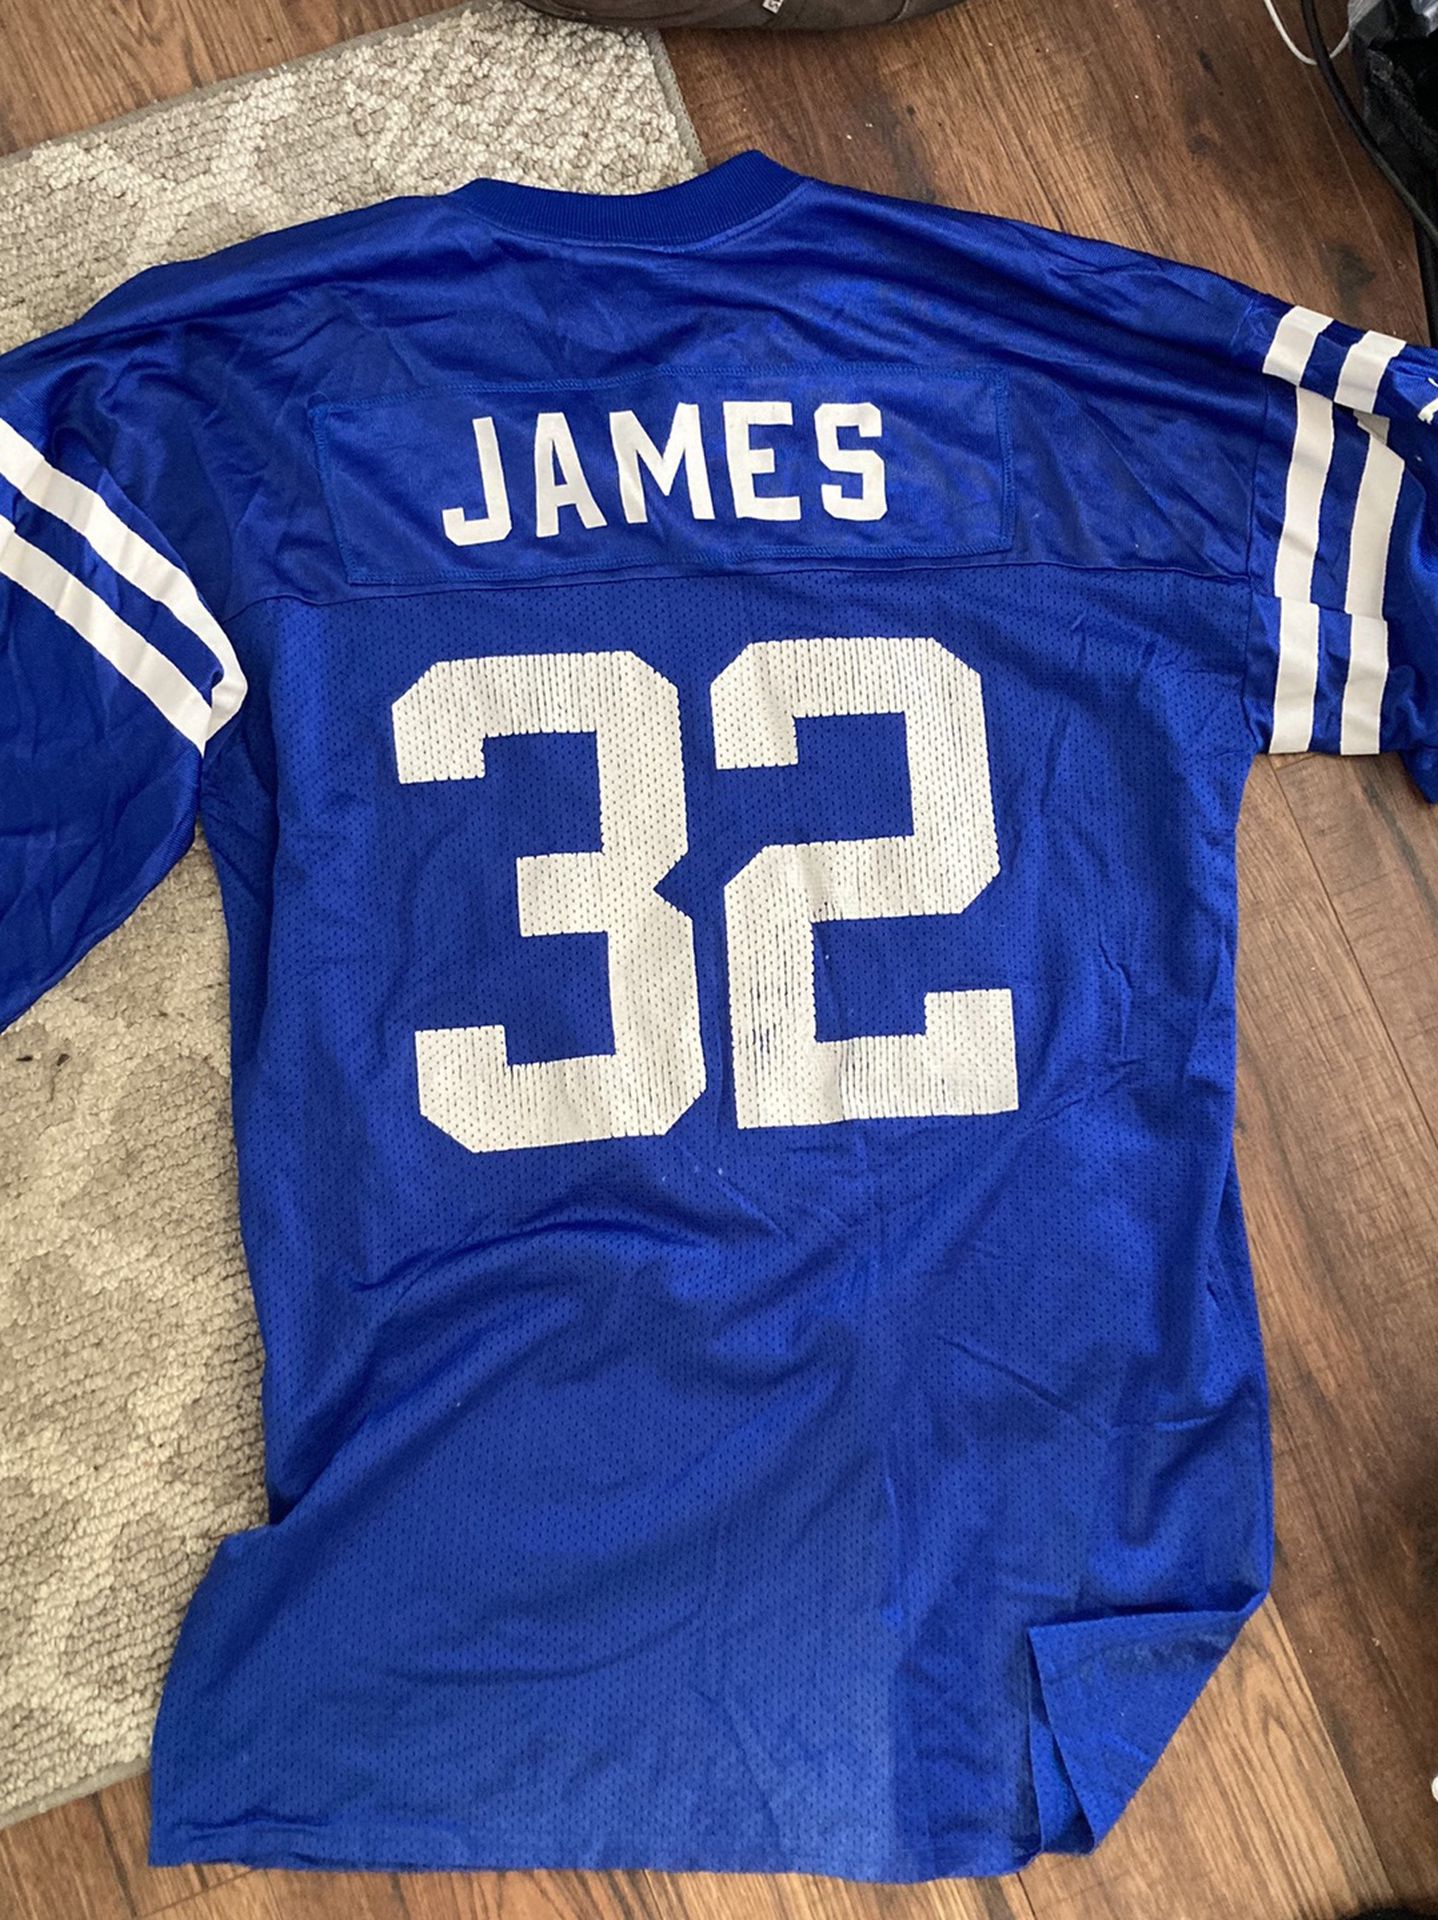 Antique Edgerine James Jersey From When He Played